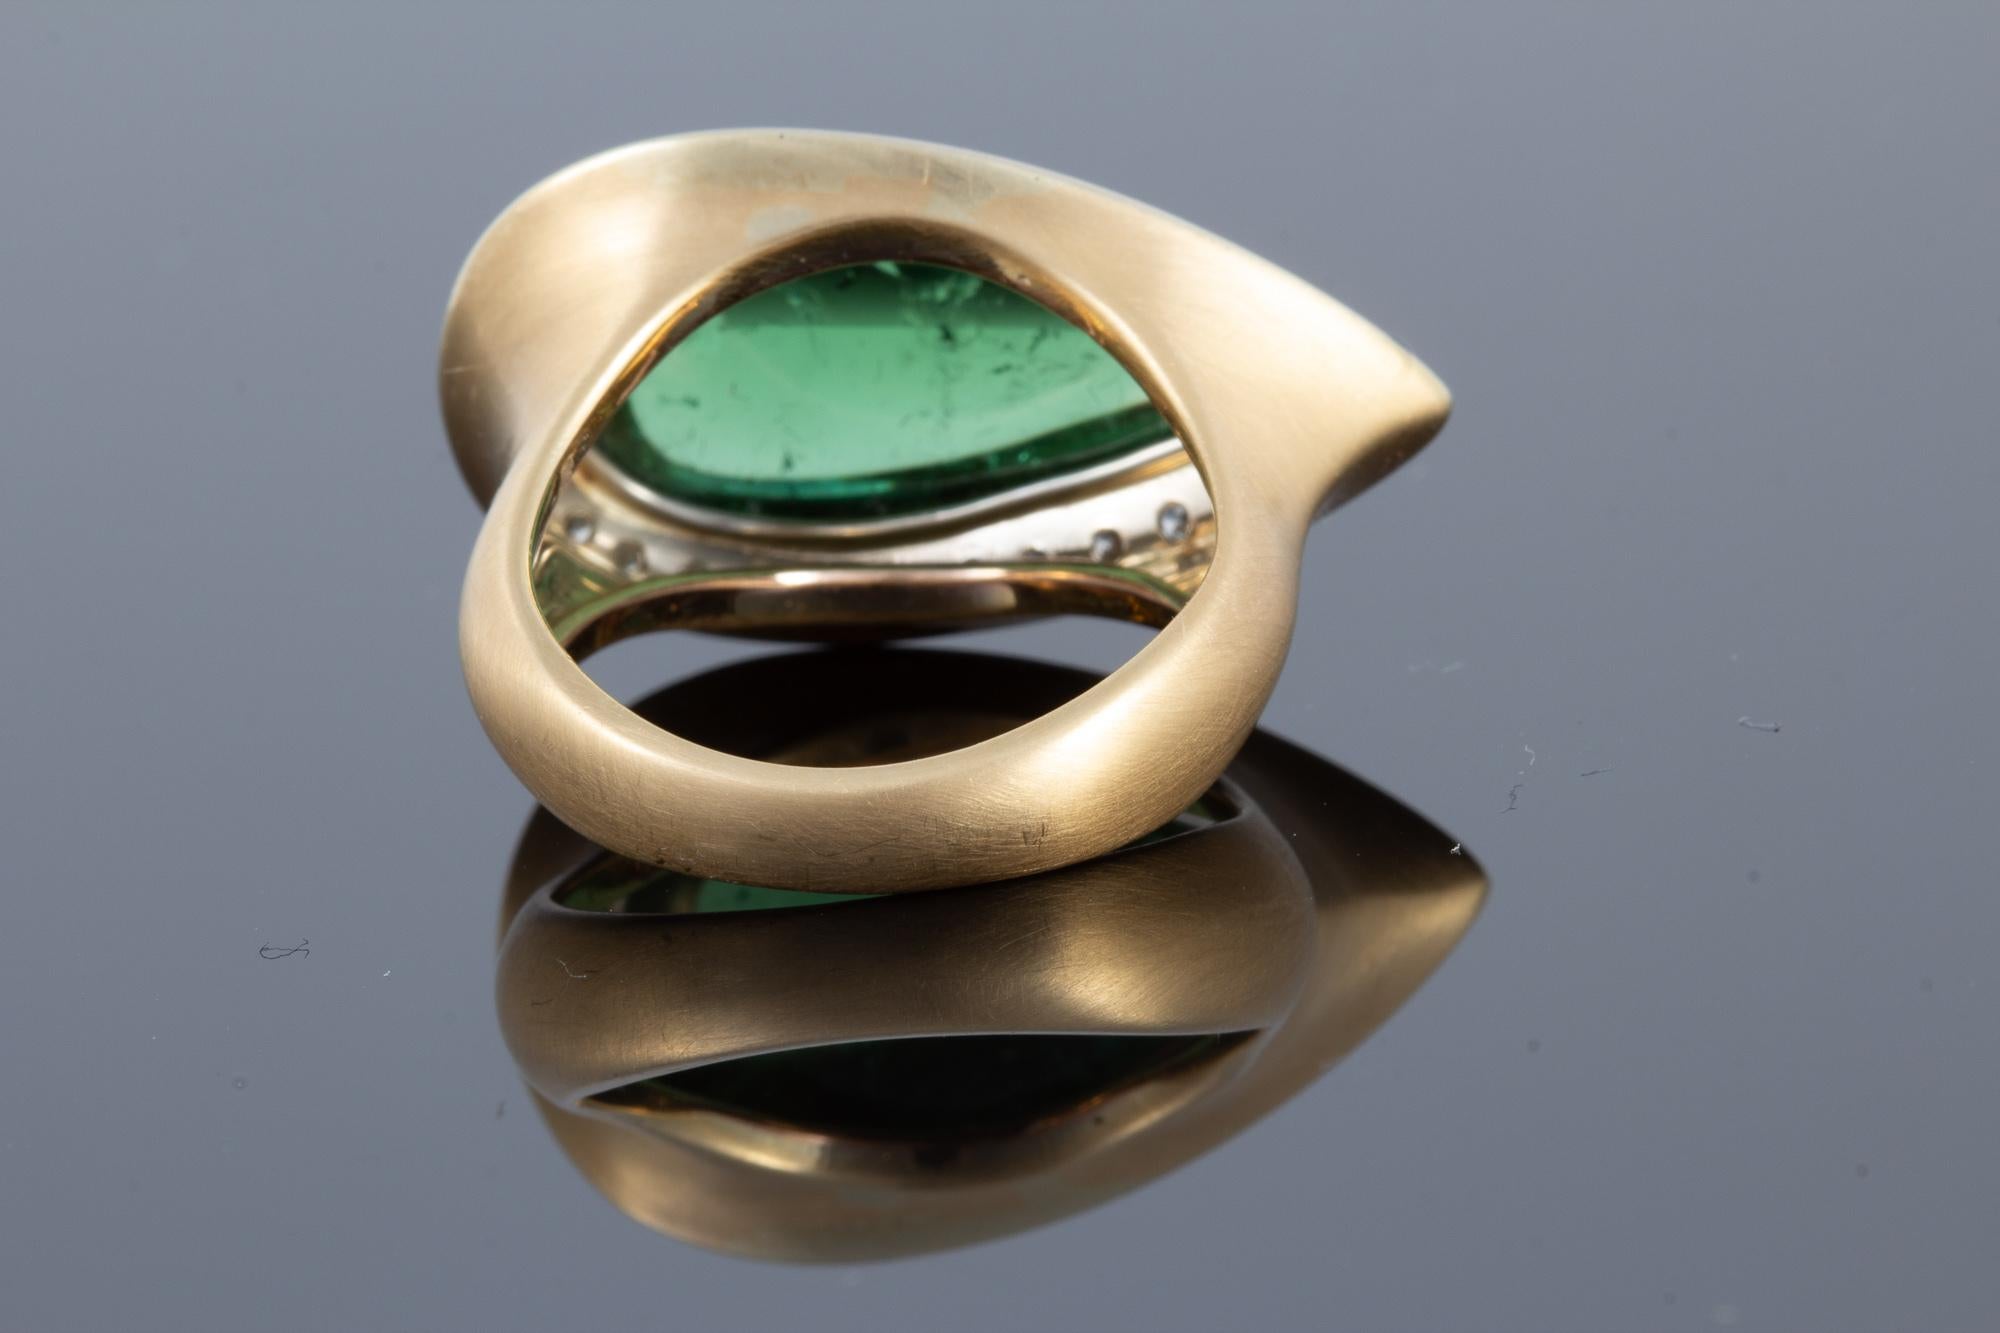 Exquisite 12.4 carat Green Tourmaline Cabochon Ring set in 18 karat Gold In Excellent Condition For Sale In Houston, TX